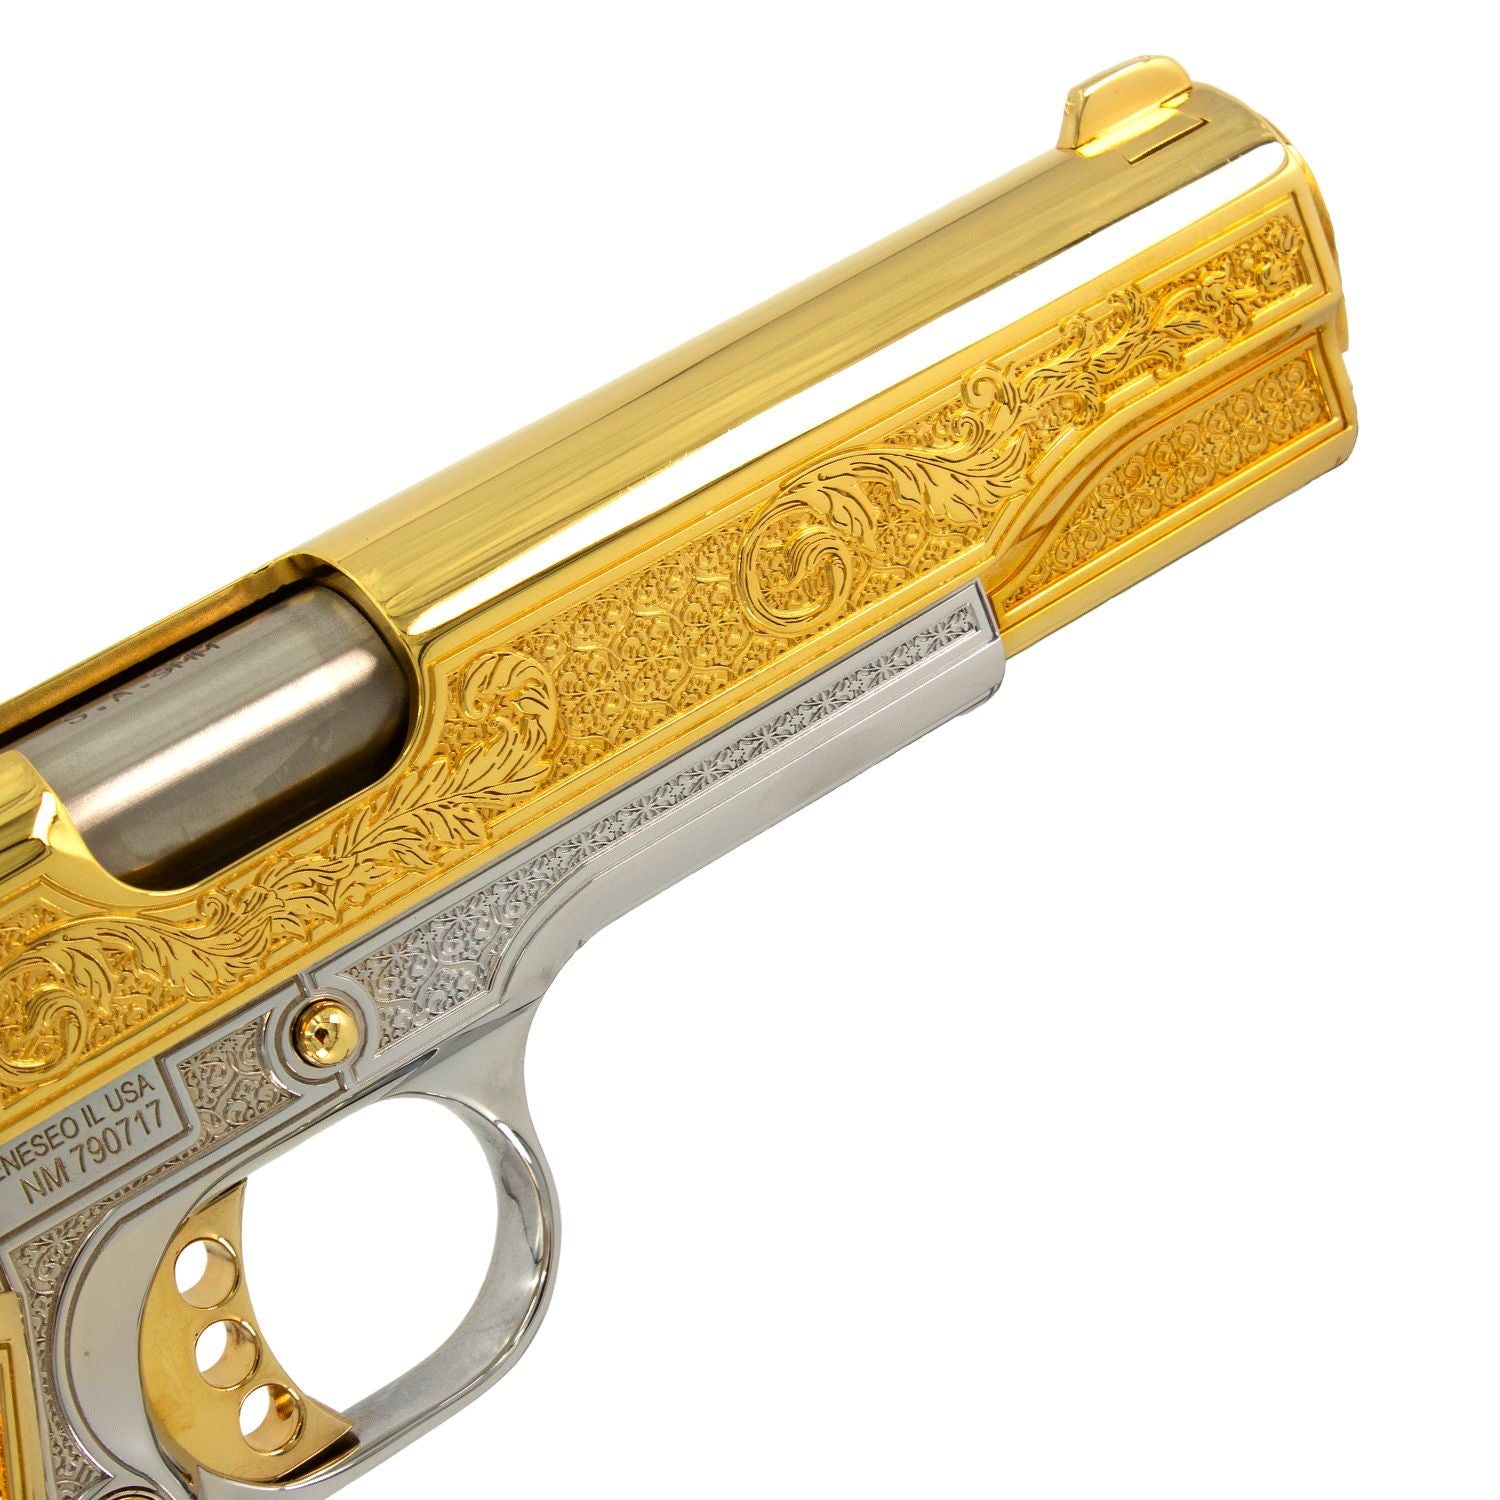 French Baroque Springfield 1911 Garrison 9mm White Chrome frame with 24 Karat Gold Slide and Accents